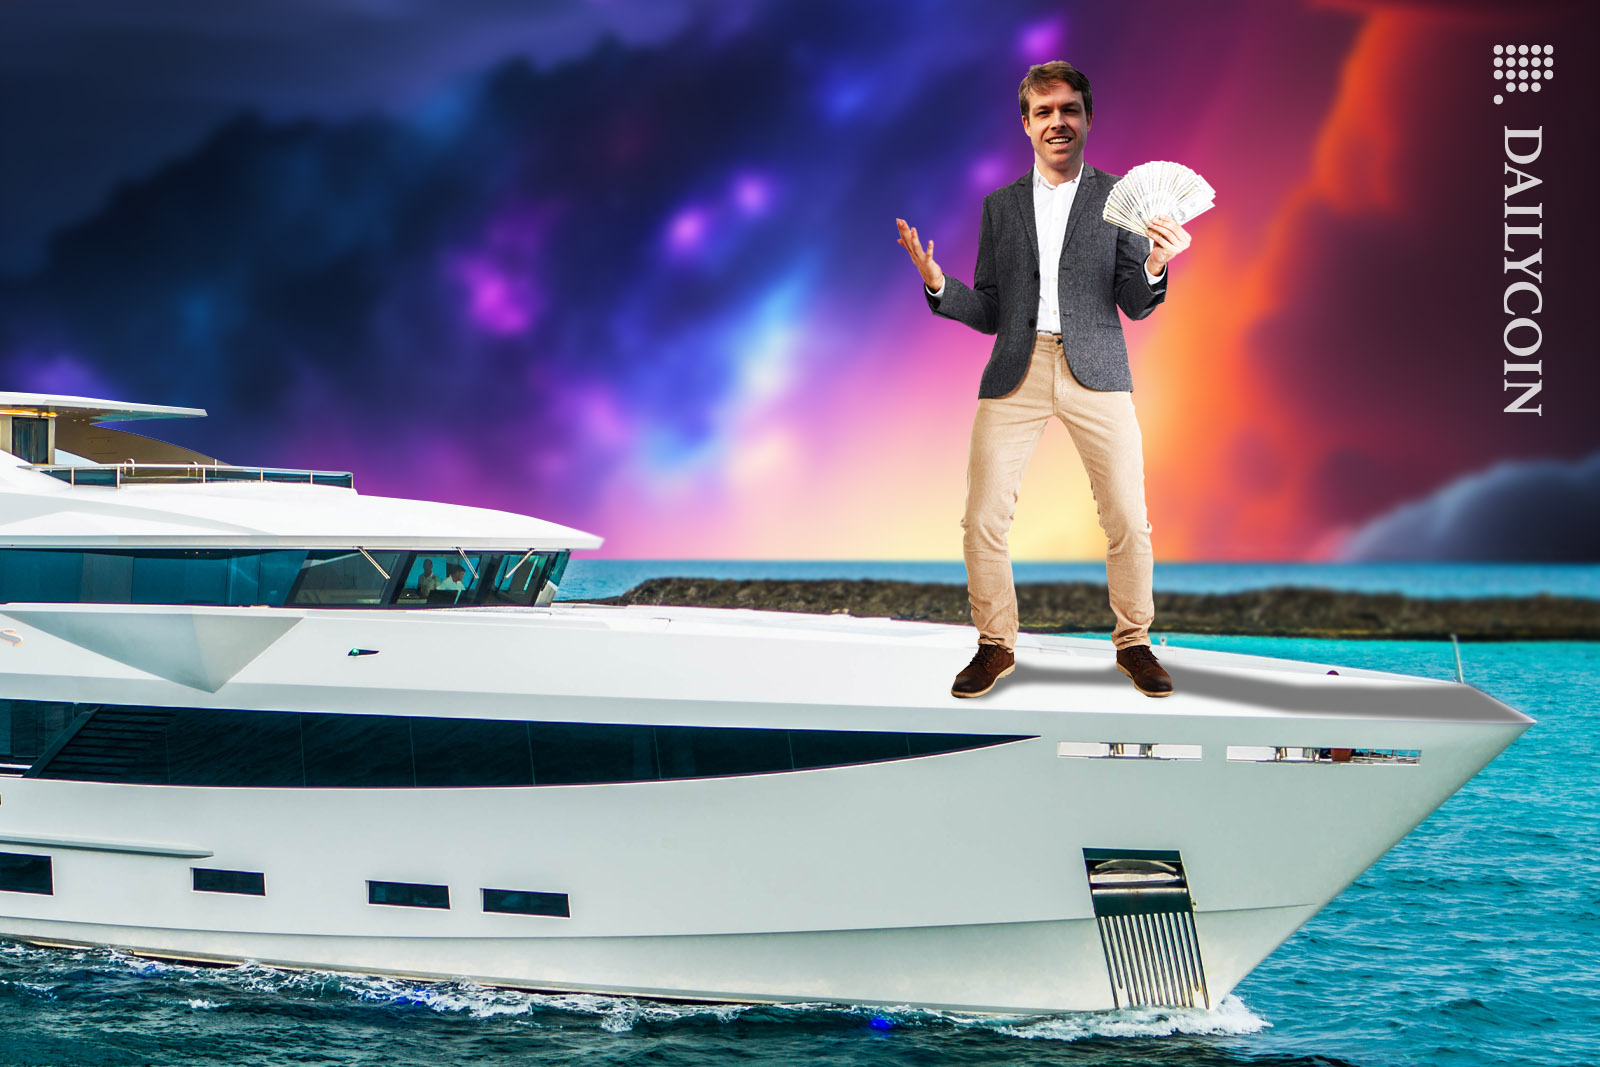 Kyle Davies flashing a bunch of money on a luxury yacht.